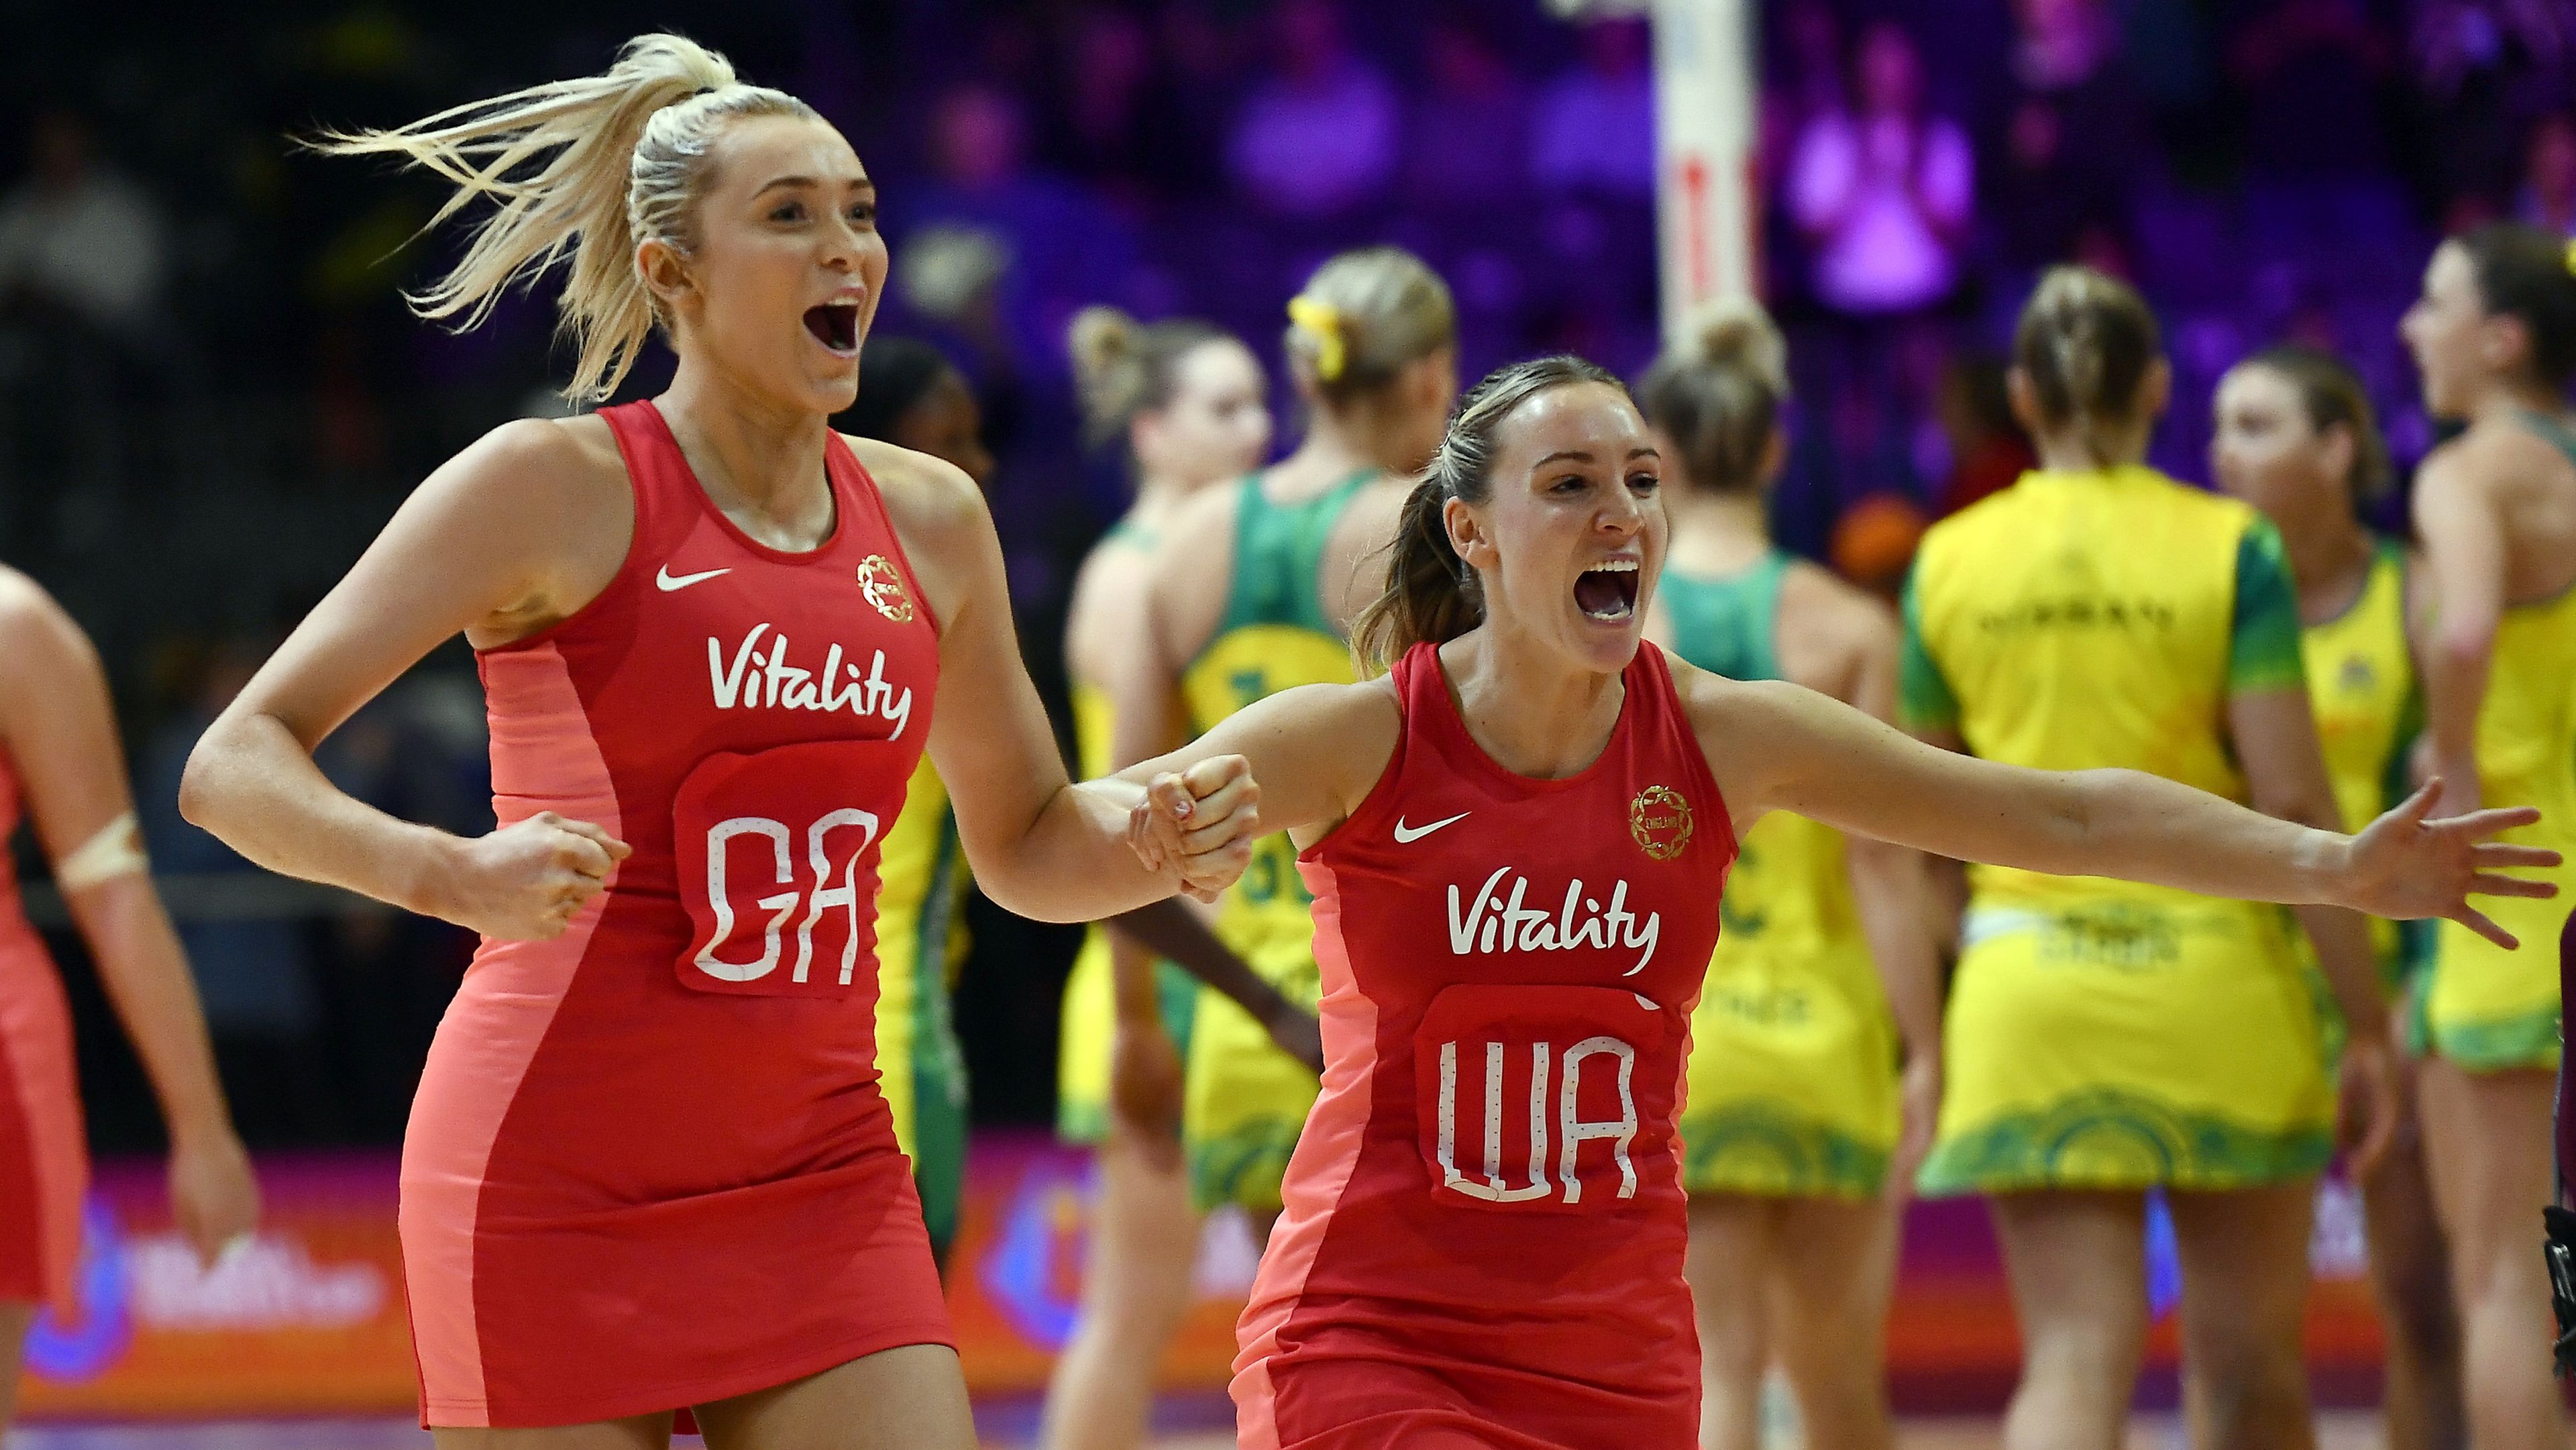 CAPE TOWN, SOUTH AFRICA - AUGUST 03: Helen Housby and Natalie Metcalf (Co-Captain) of England celebrates during the Netball World Cup 2023, Pool F match between Australia and England at Cape Town International Convention Centre Court 1 on August 03, 2023 in Cape Town, South Africa. (Photo by Ashley Vlotman/Gallo Images/Netball World Cup 2023 via Getty Images)